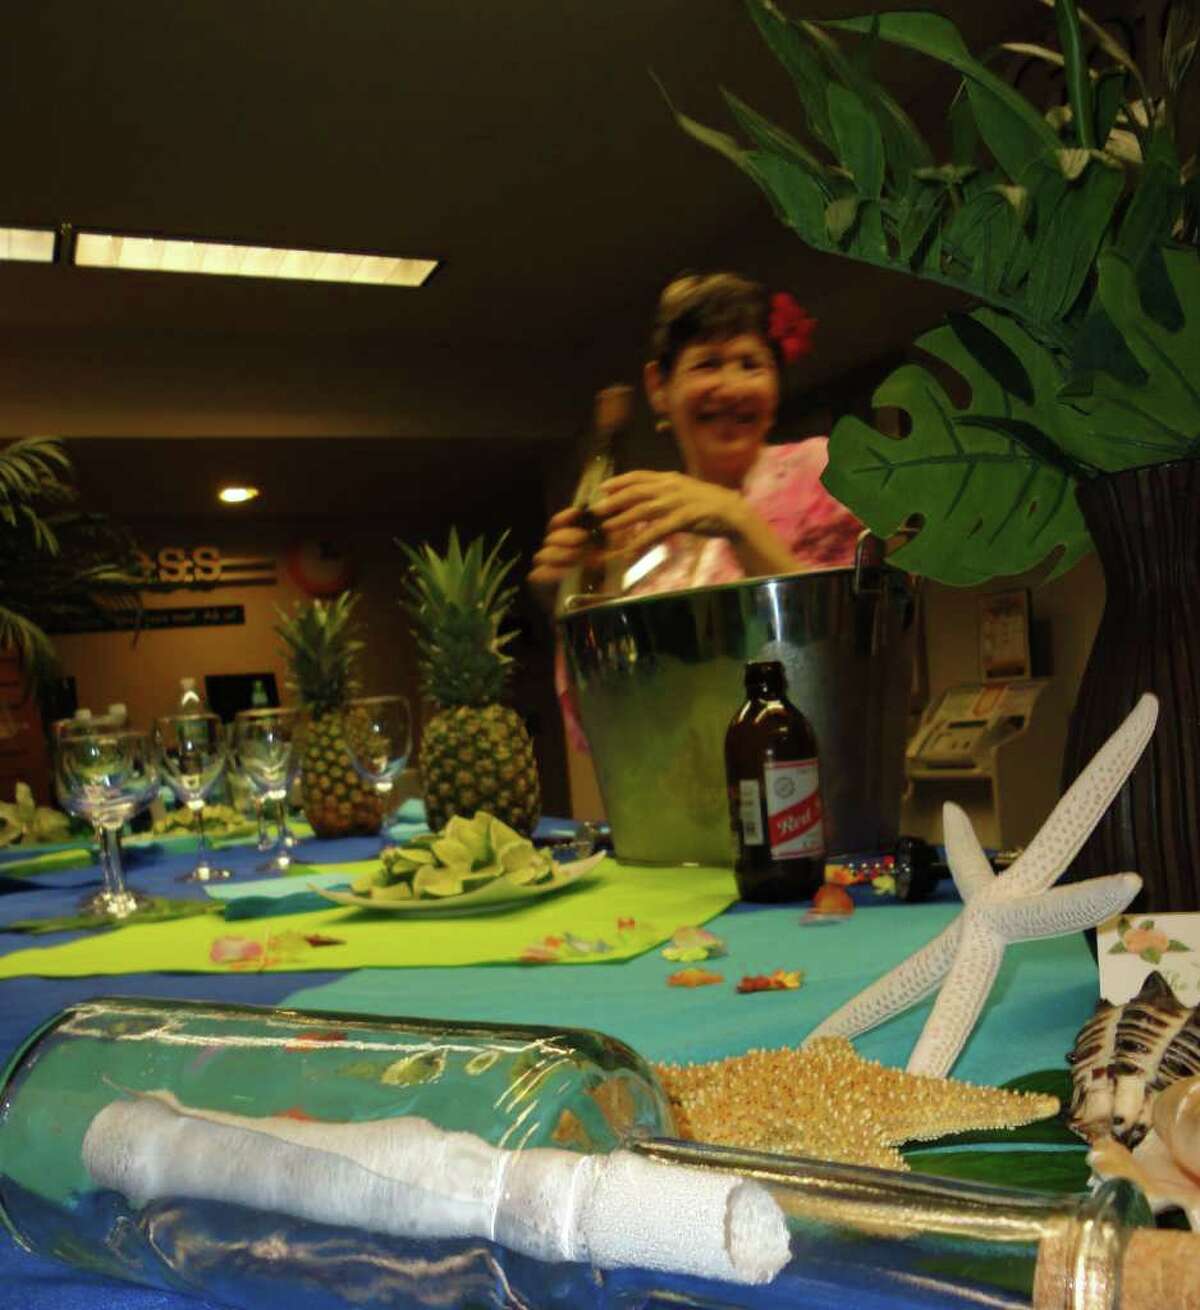 Suzy Hooper, a Westport Library staff member, tended bar at the Tropical Island Party on Friday, which closed a month of WestportREADS events related to the book, "I Was Amelia Earhart."